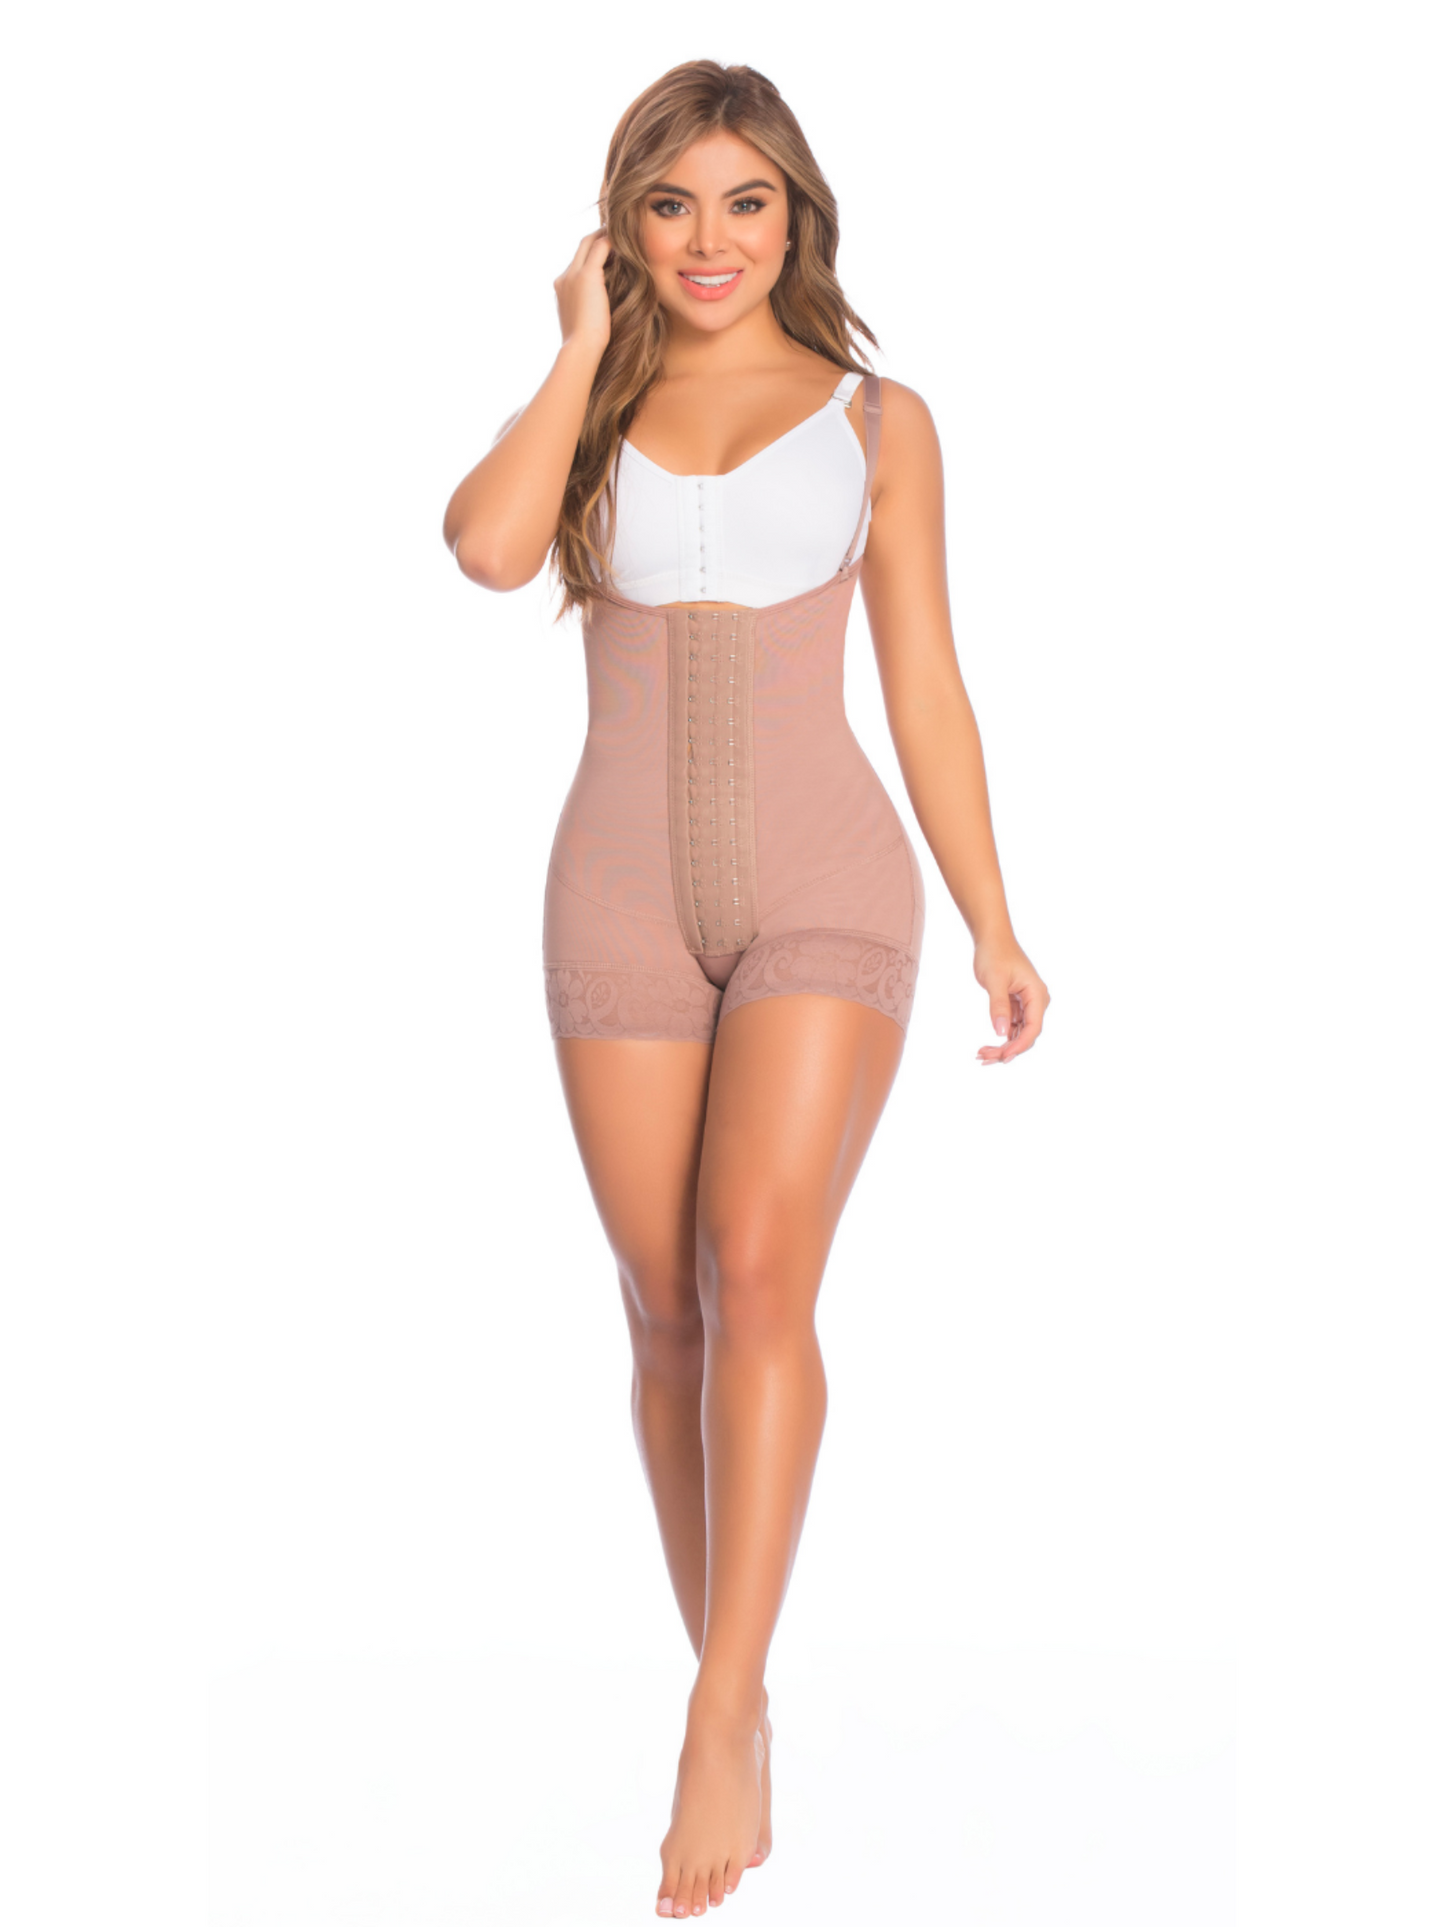 Girdle Back Support 3-Level Adjustable Front Hook Closure Post Surgical  with Straps Lifts Aligns The Bust Improves Posture Beige at  Women's  Clothing store